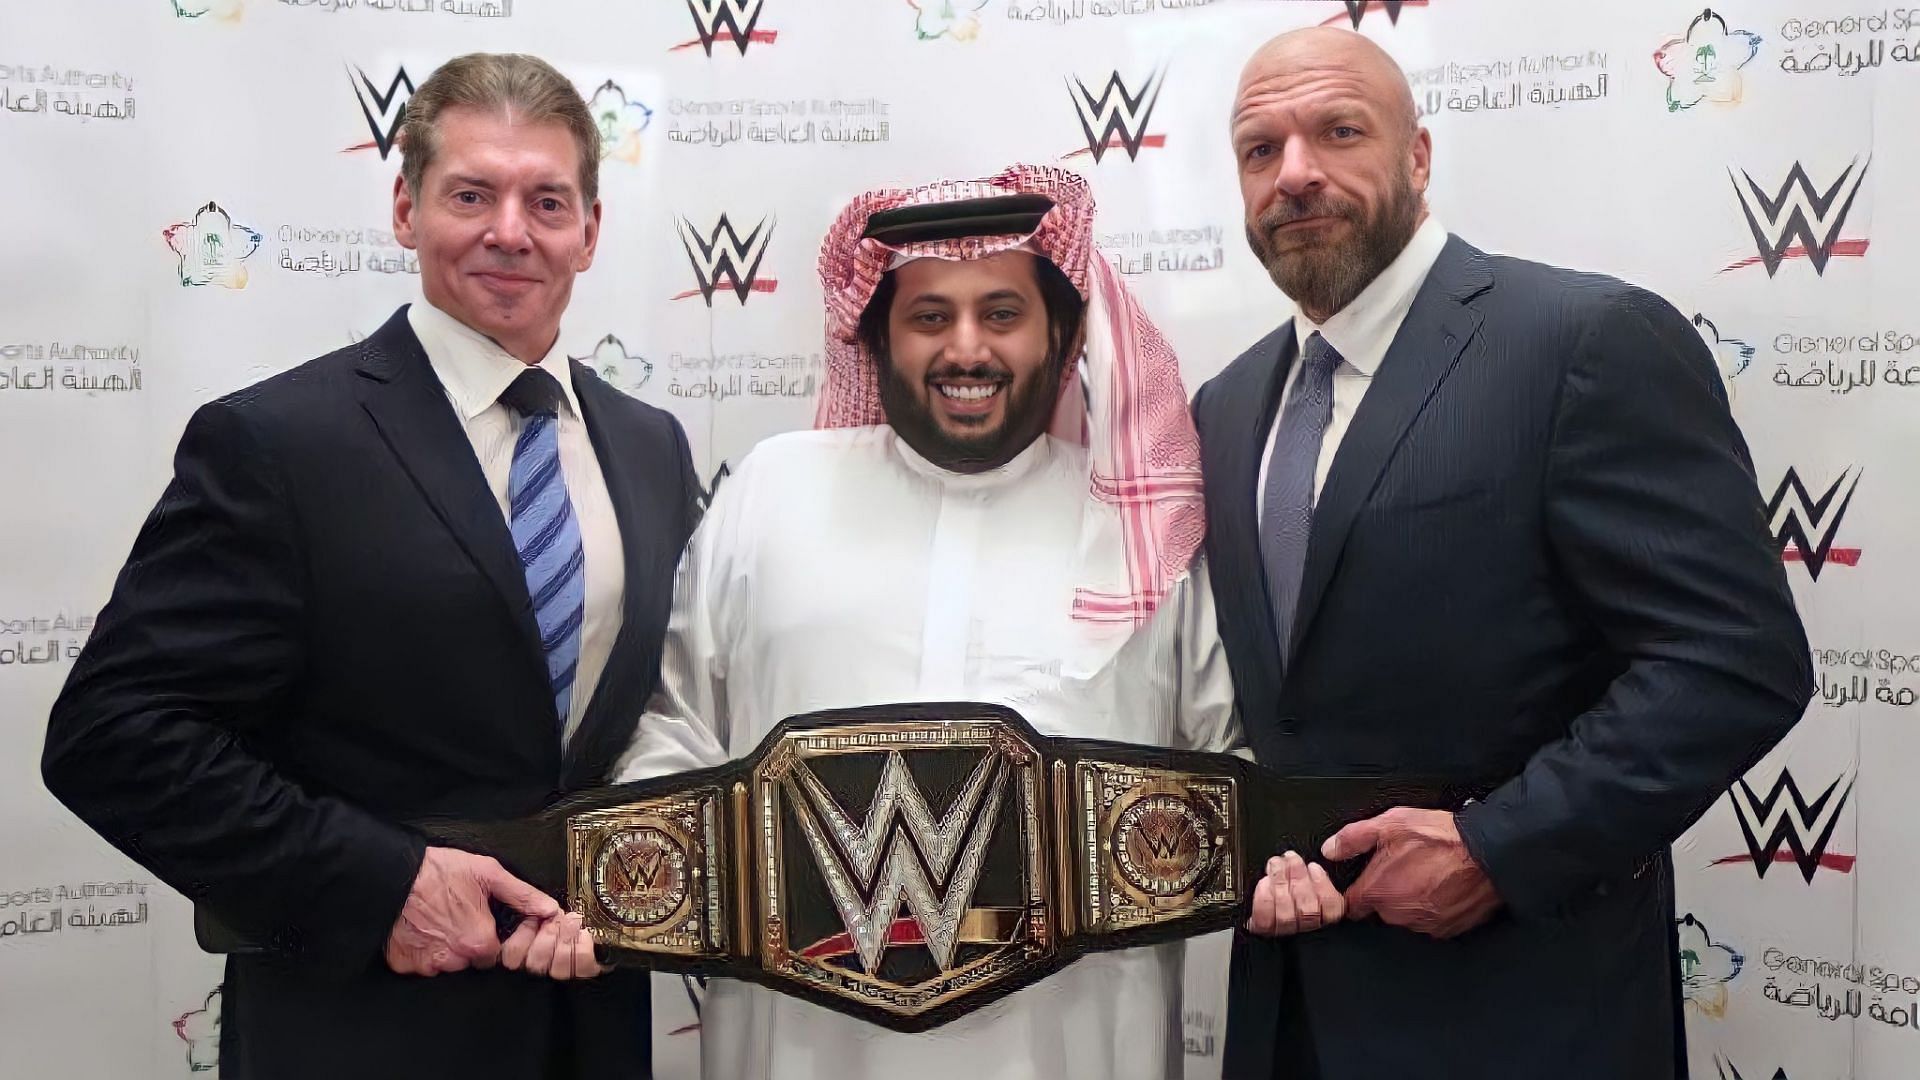 WWE might be set to host a major event in Saudi Arabia this year